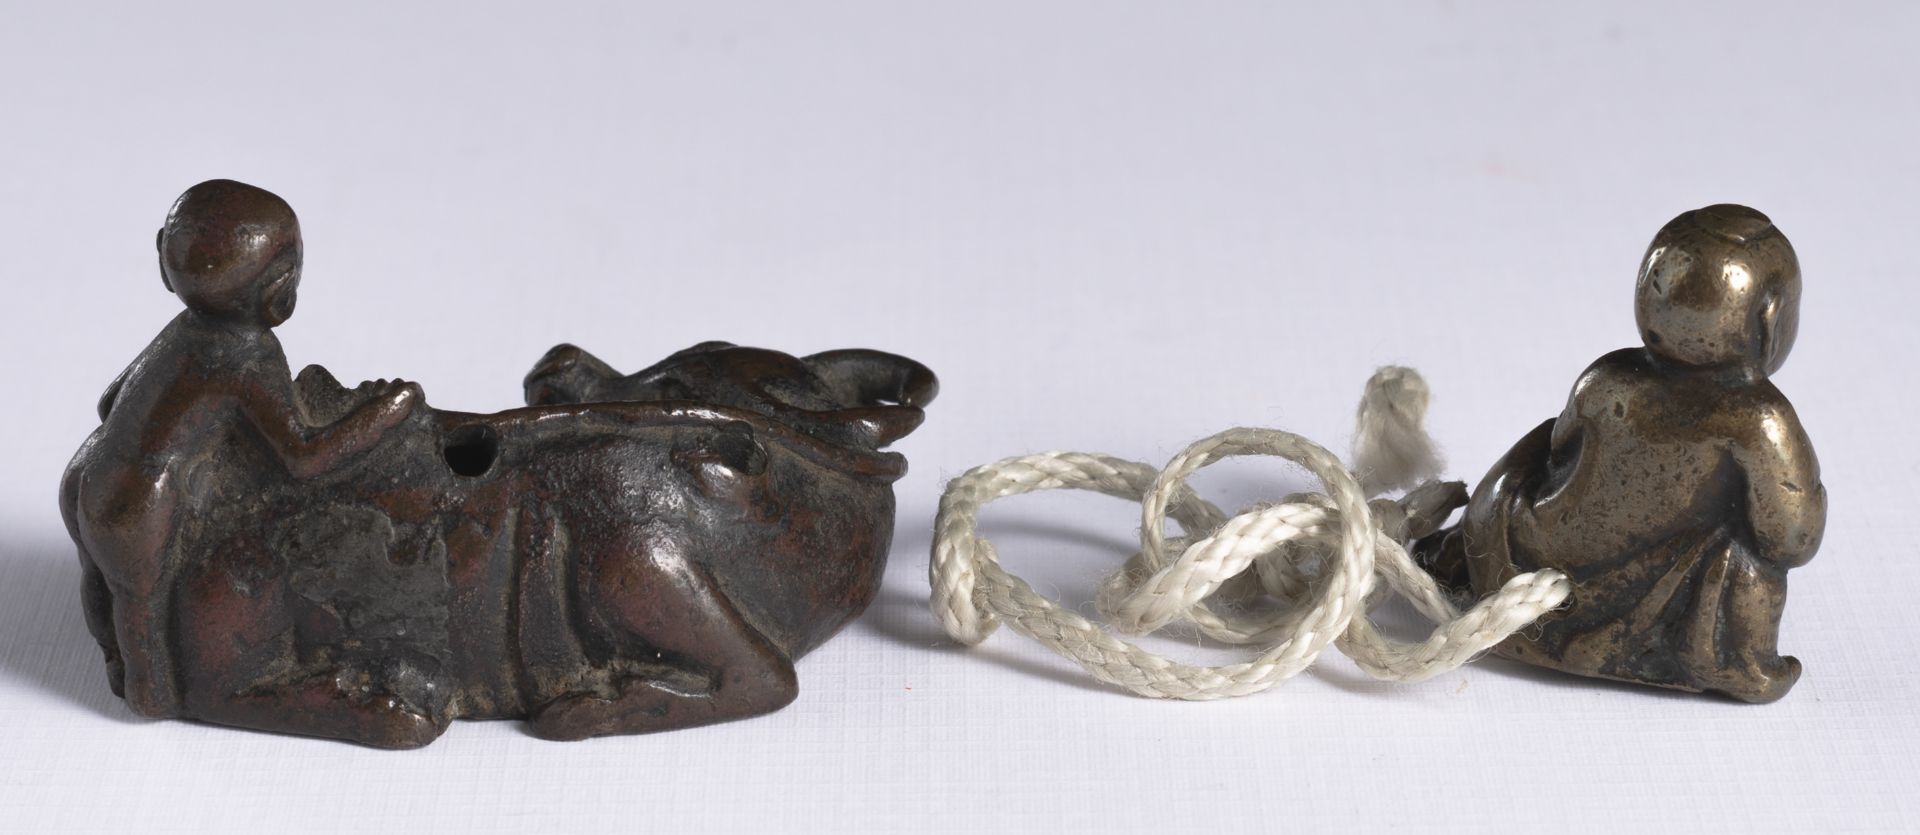 TWO SMALL BRONZES AS NETSUKE: A YOUNG BOY WITH BUFFALO AND A RESTING BOY - Image 2 of 3